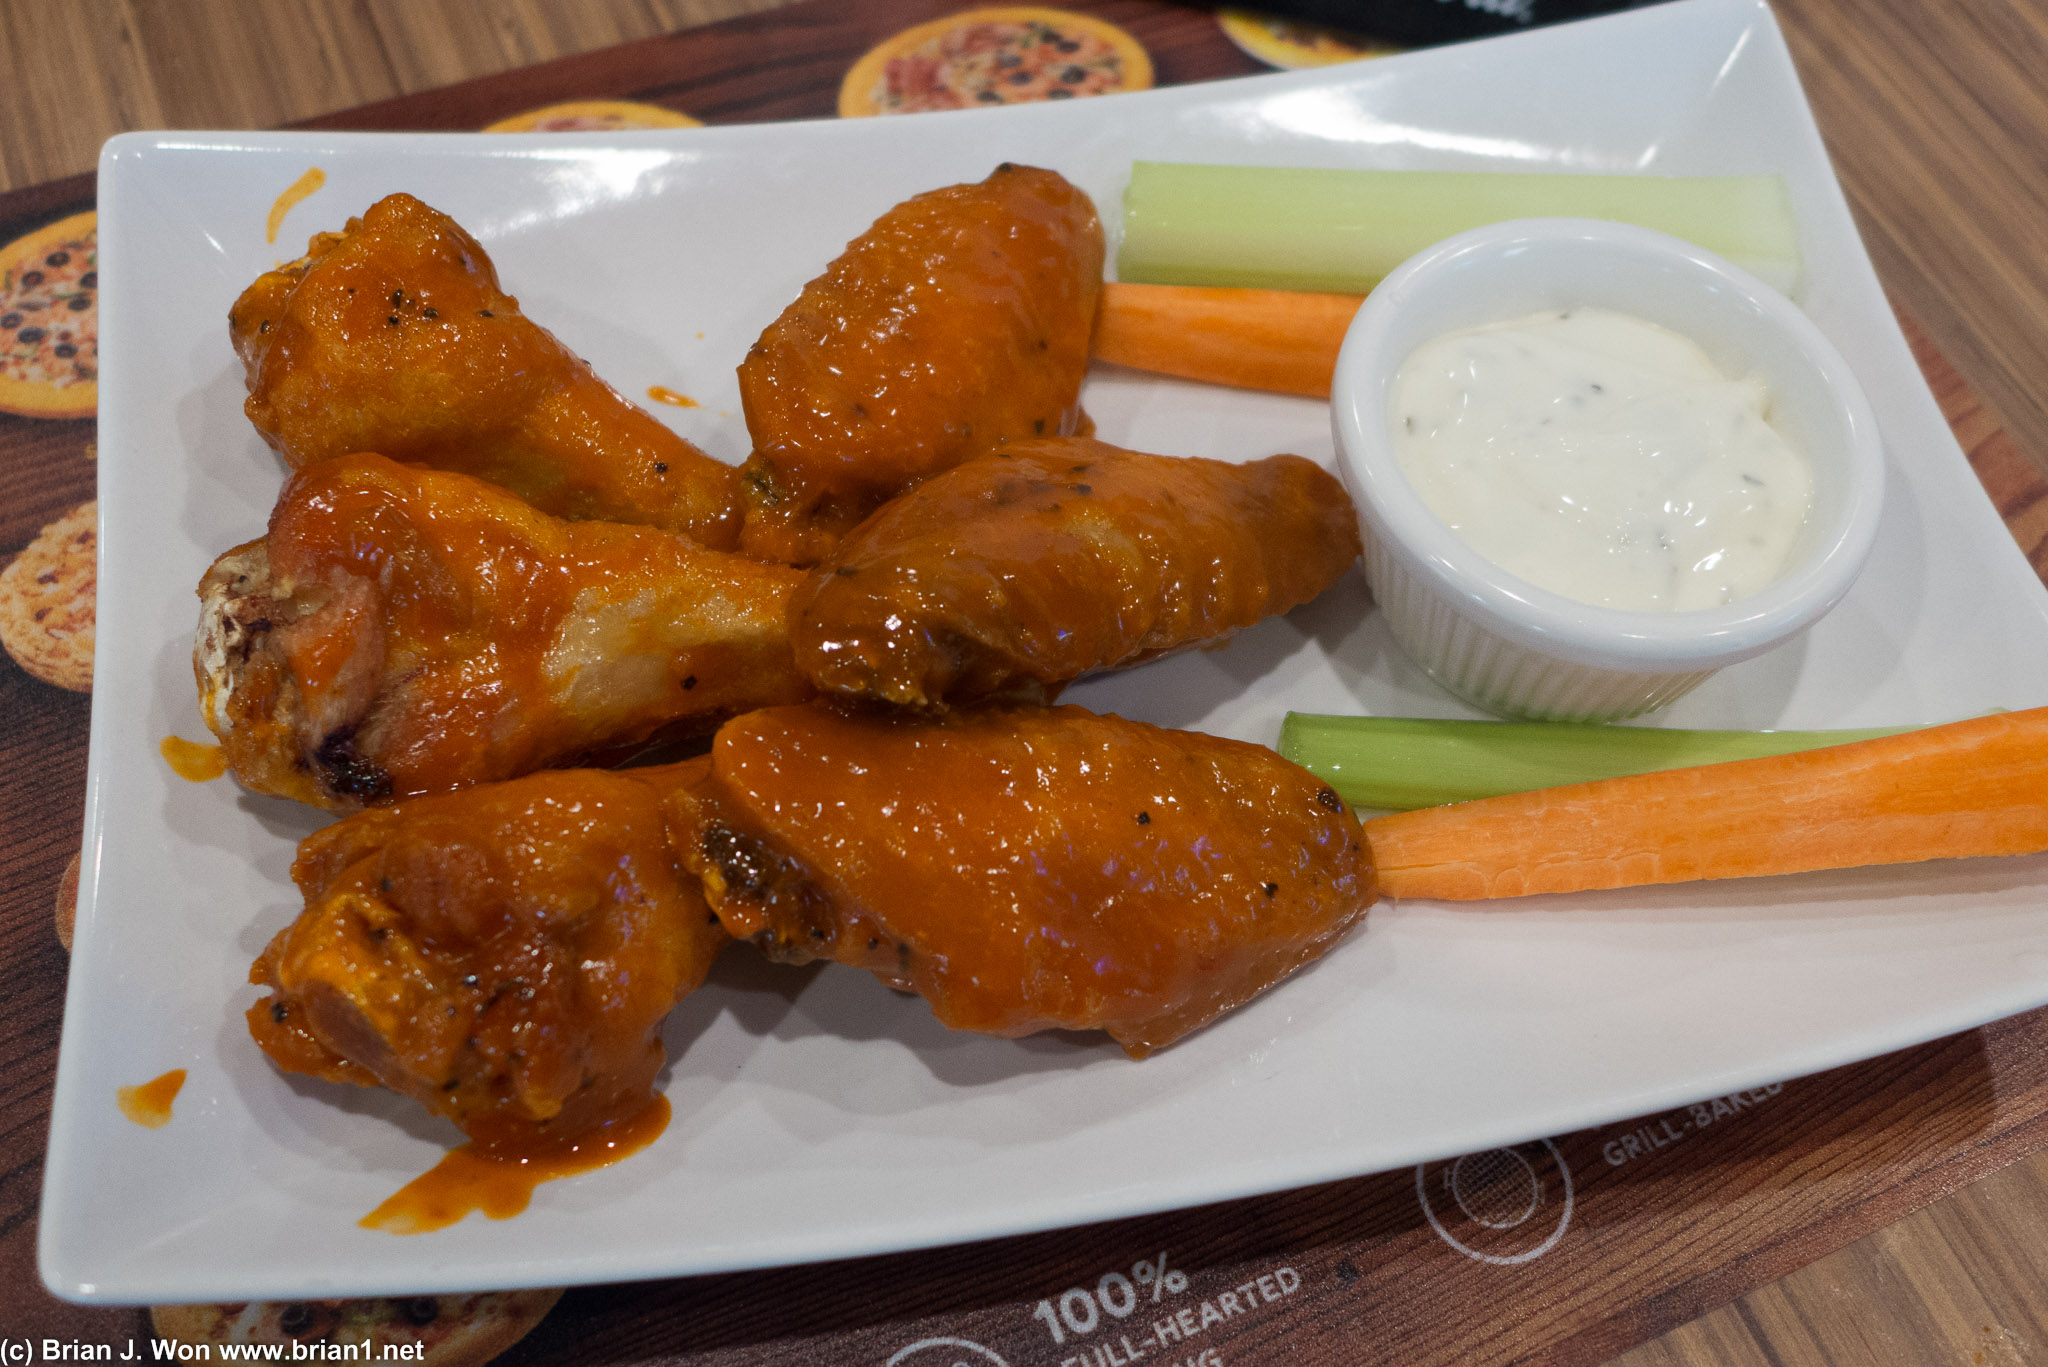 Snacking on some so-so buffalo wings.